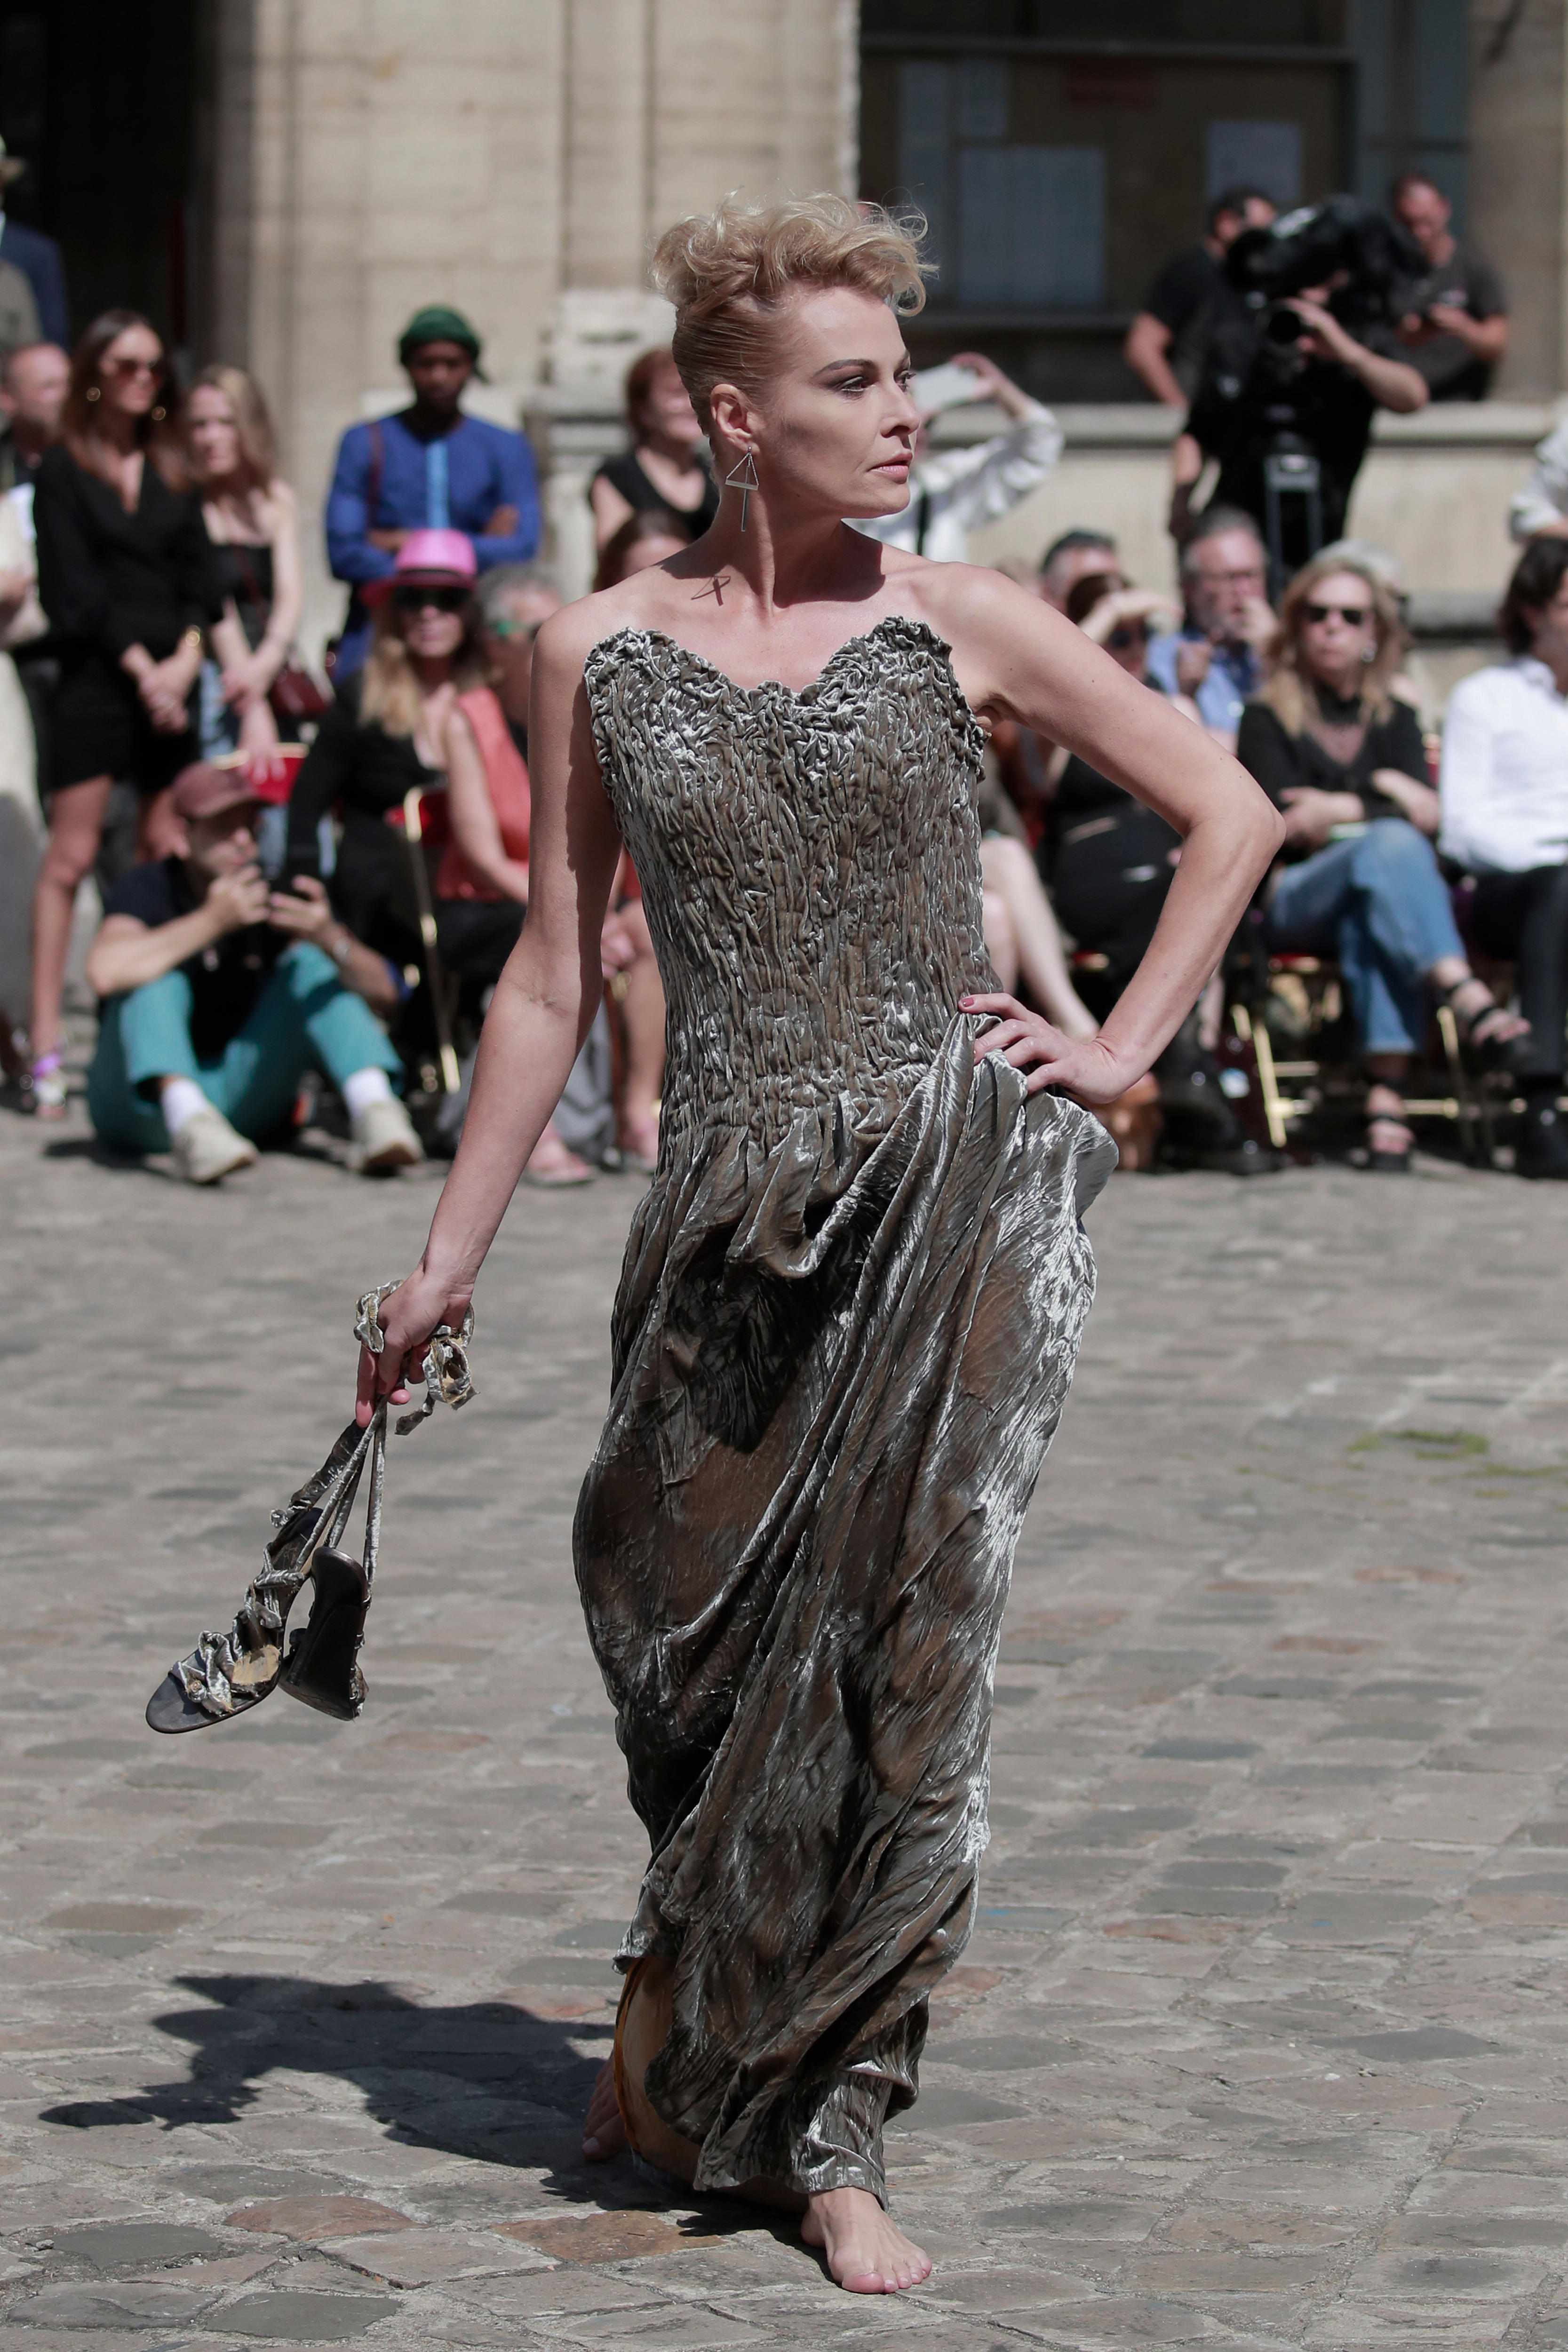 A model in a shiny dress holds high-heeled shoes. 